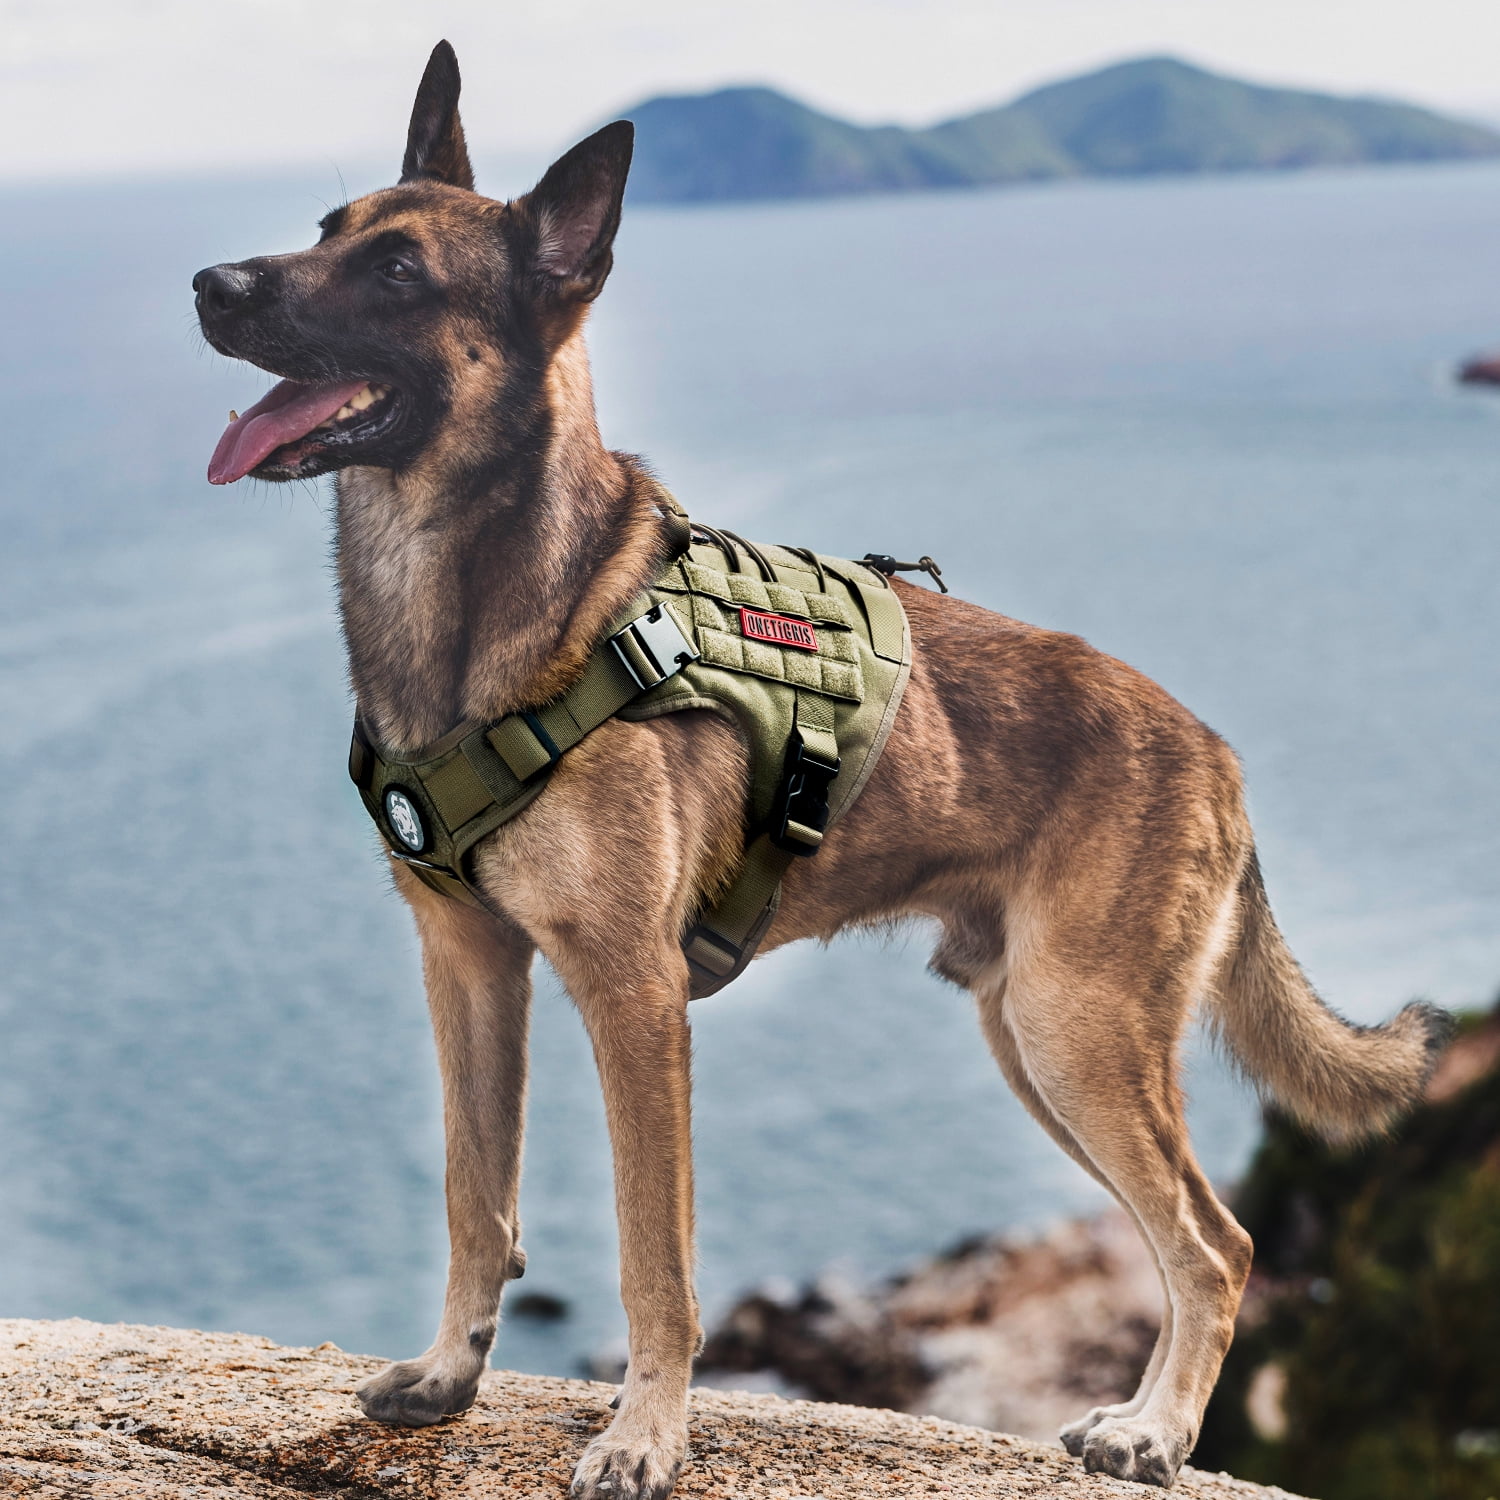 OneTigris Tactical Dog Harness,Puppy Harness with Handle, Military Vest for  Small Dogs Outdoor Easy Control Training Walking